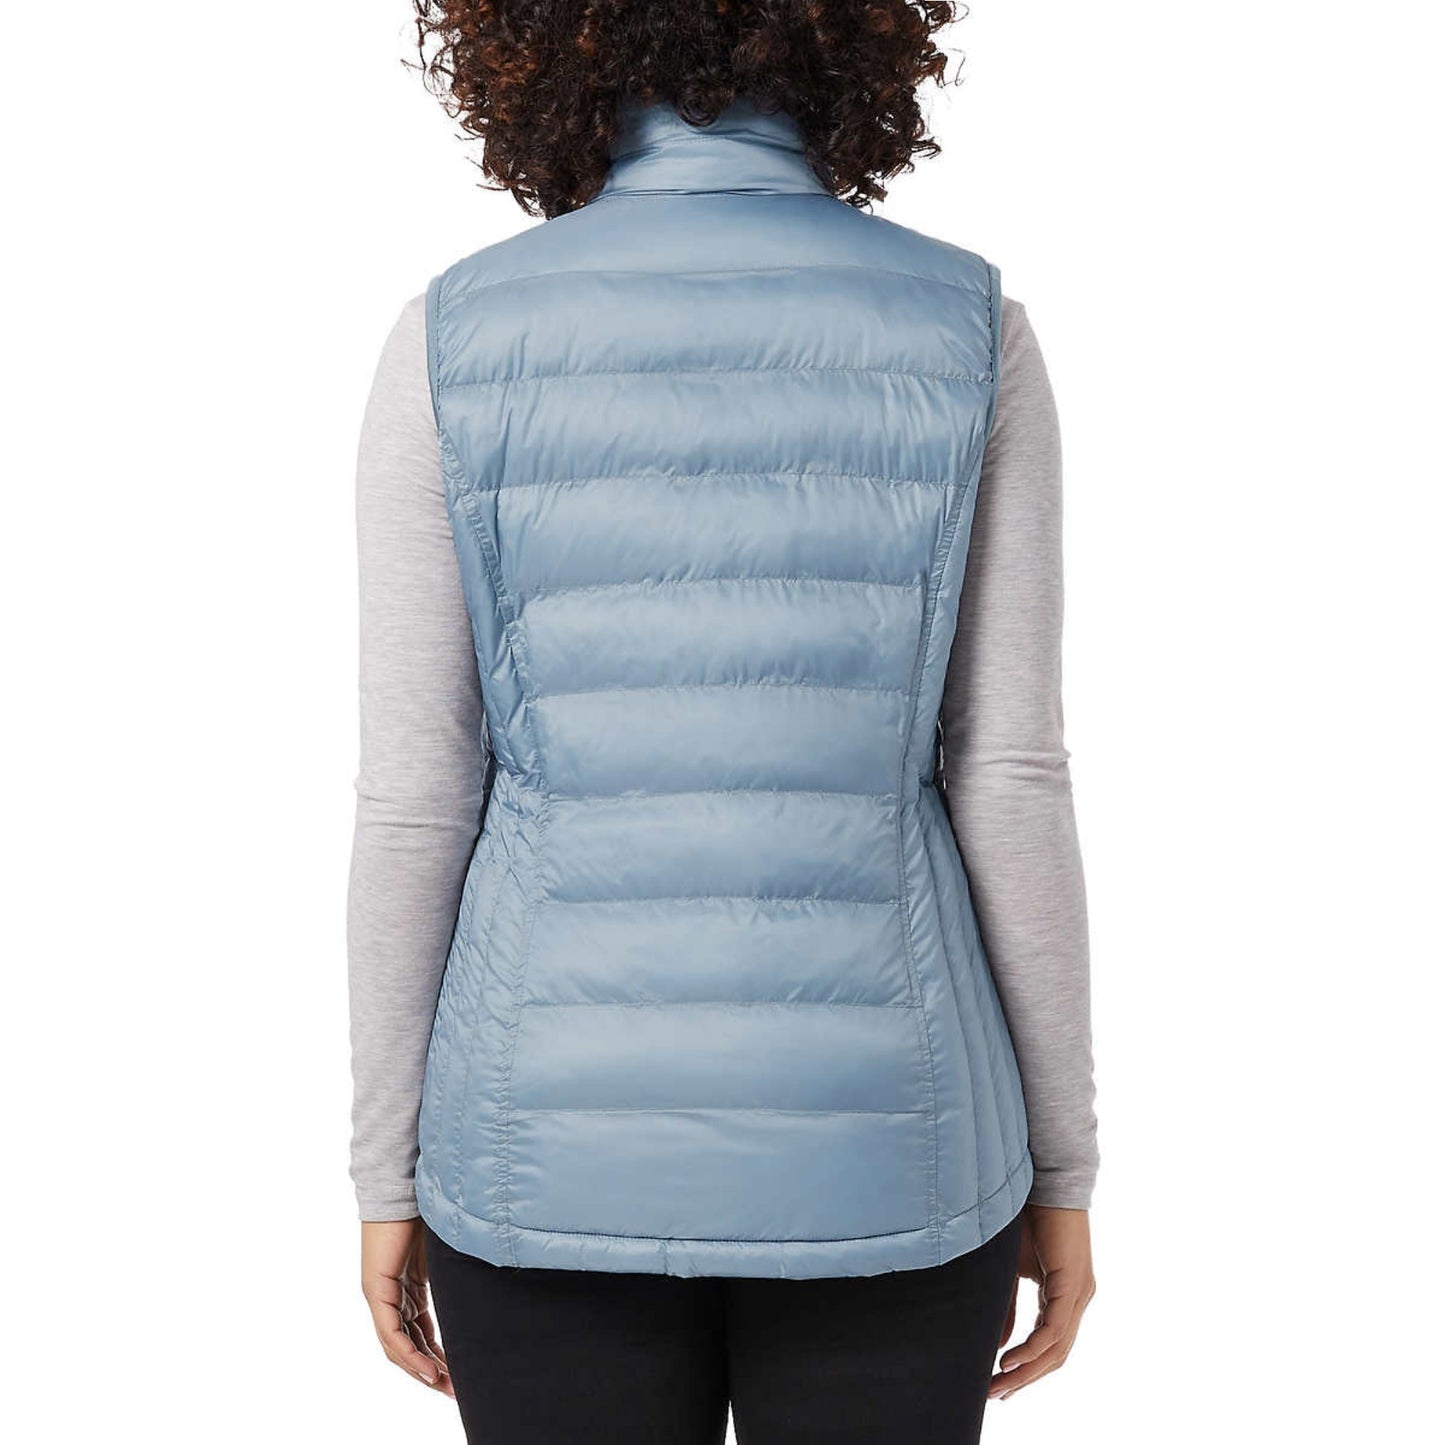 32 Degrees Women's Quilted Stand-up Collar Lightweight Warmth Full Zip Vest